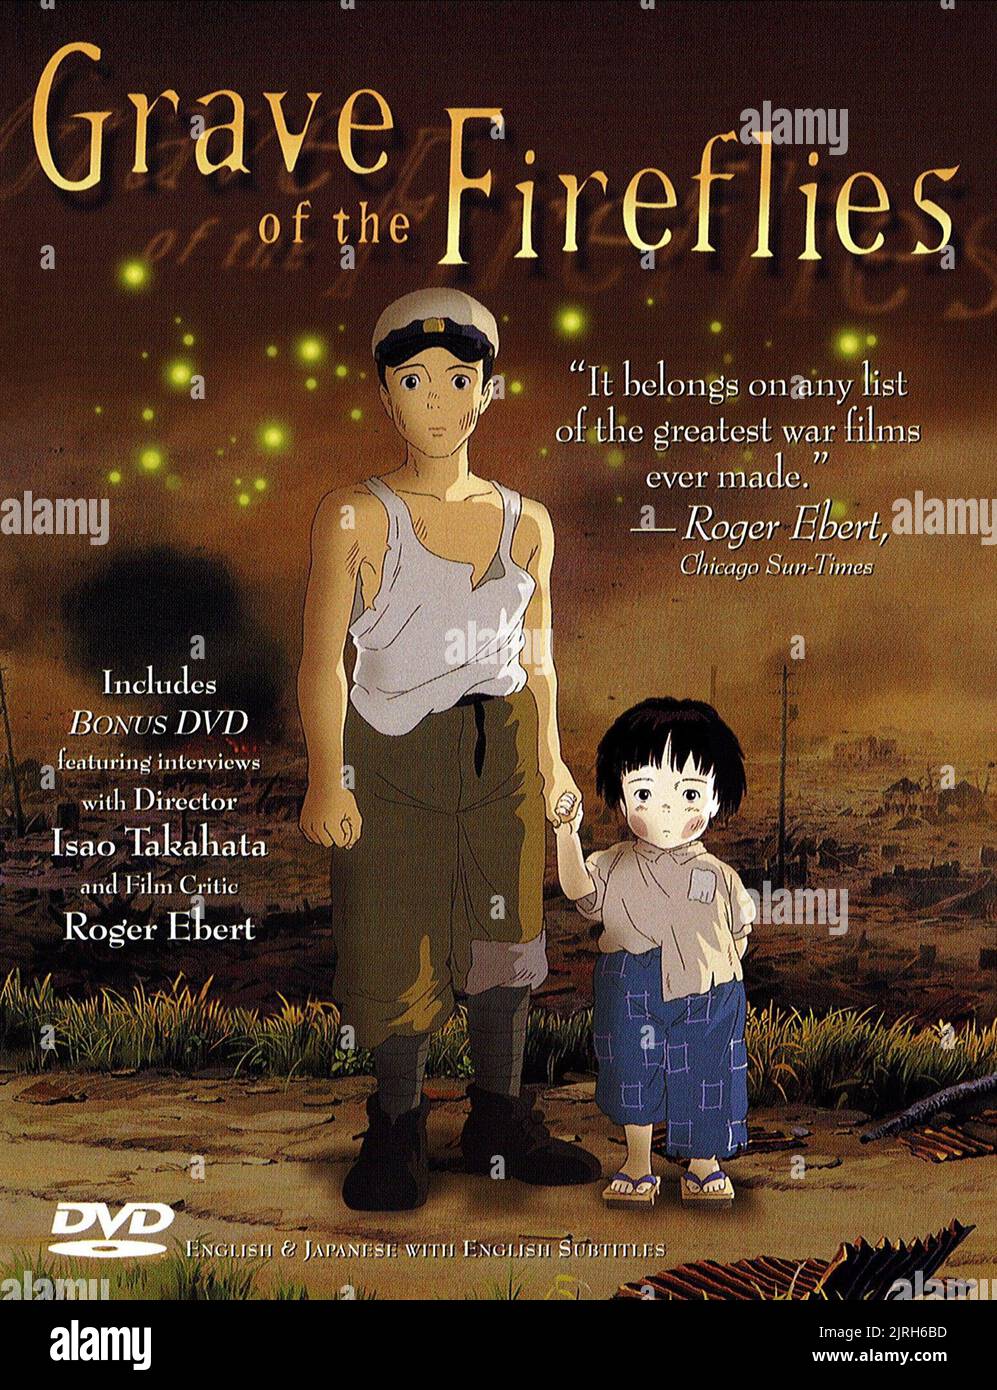 Film Review] Josep (2020) and Grave of the Fireflies (1988